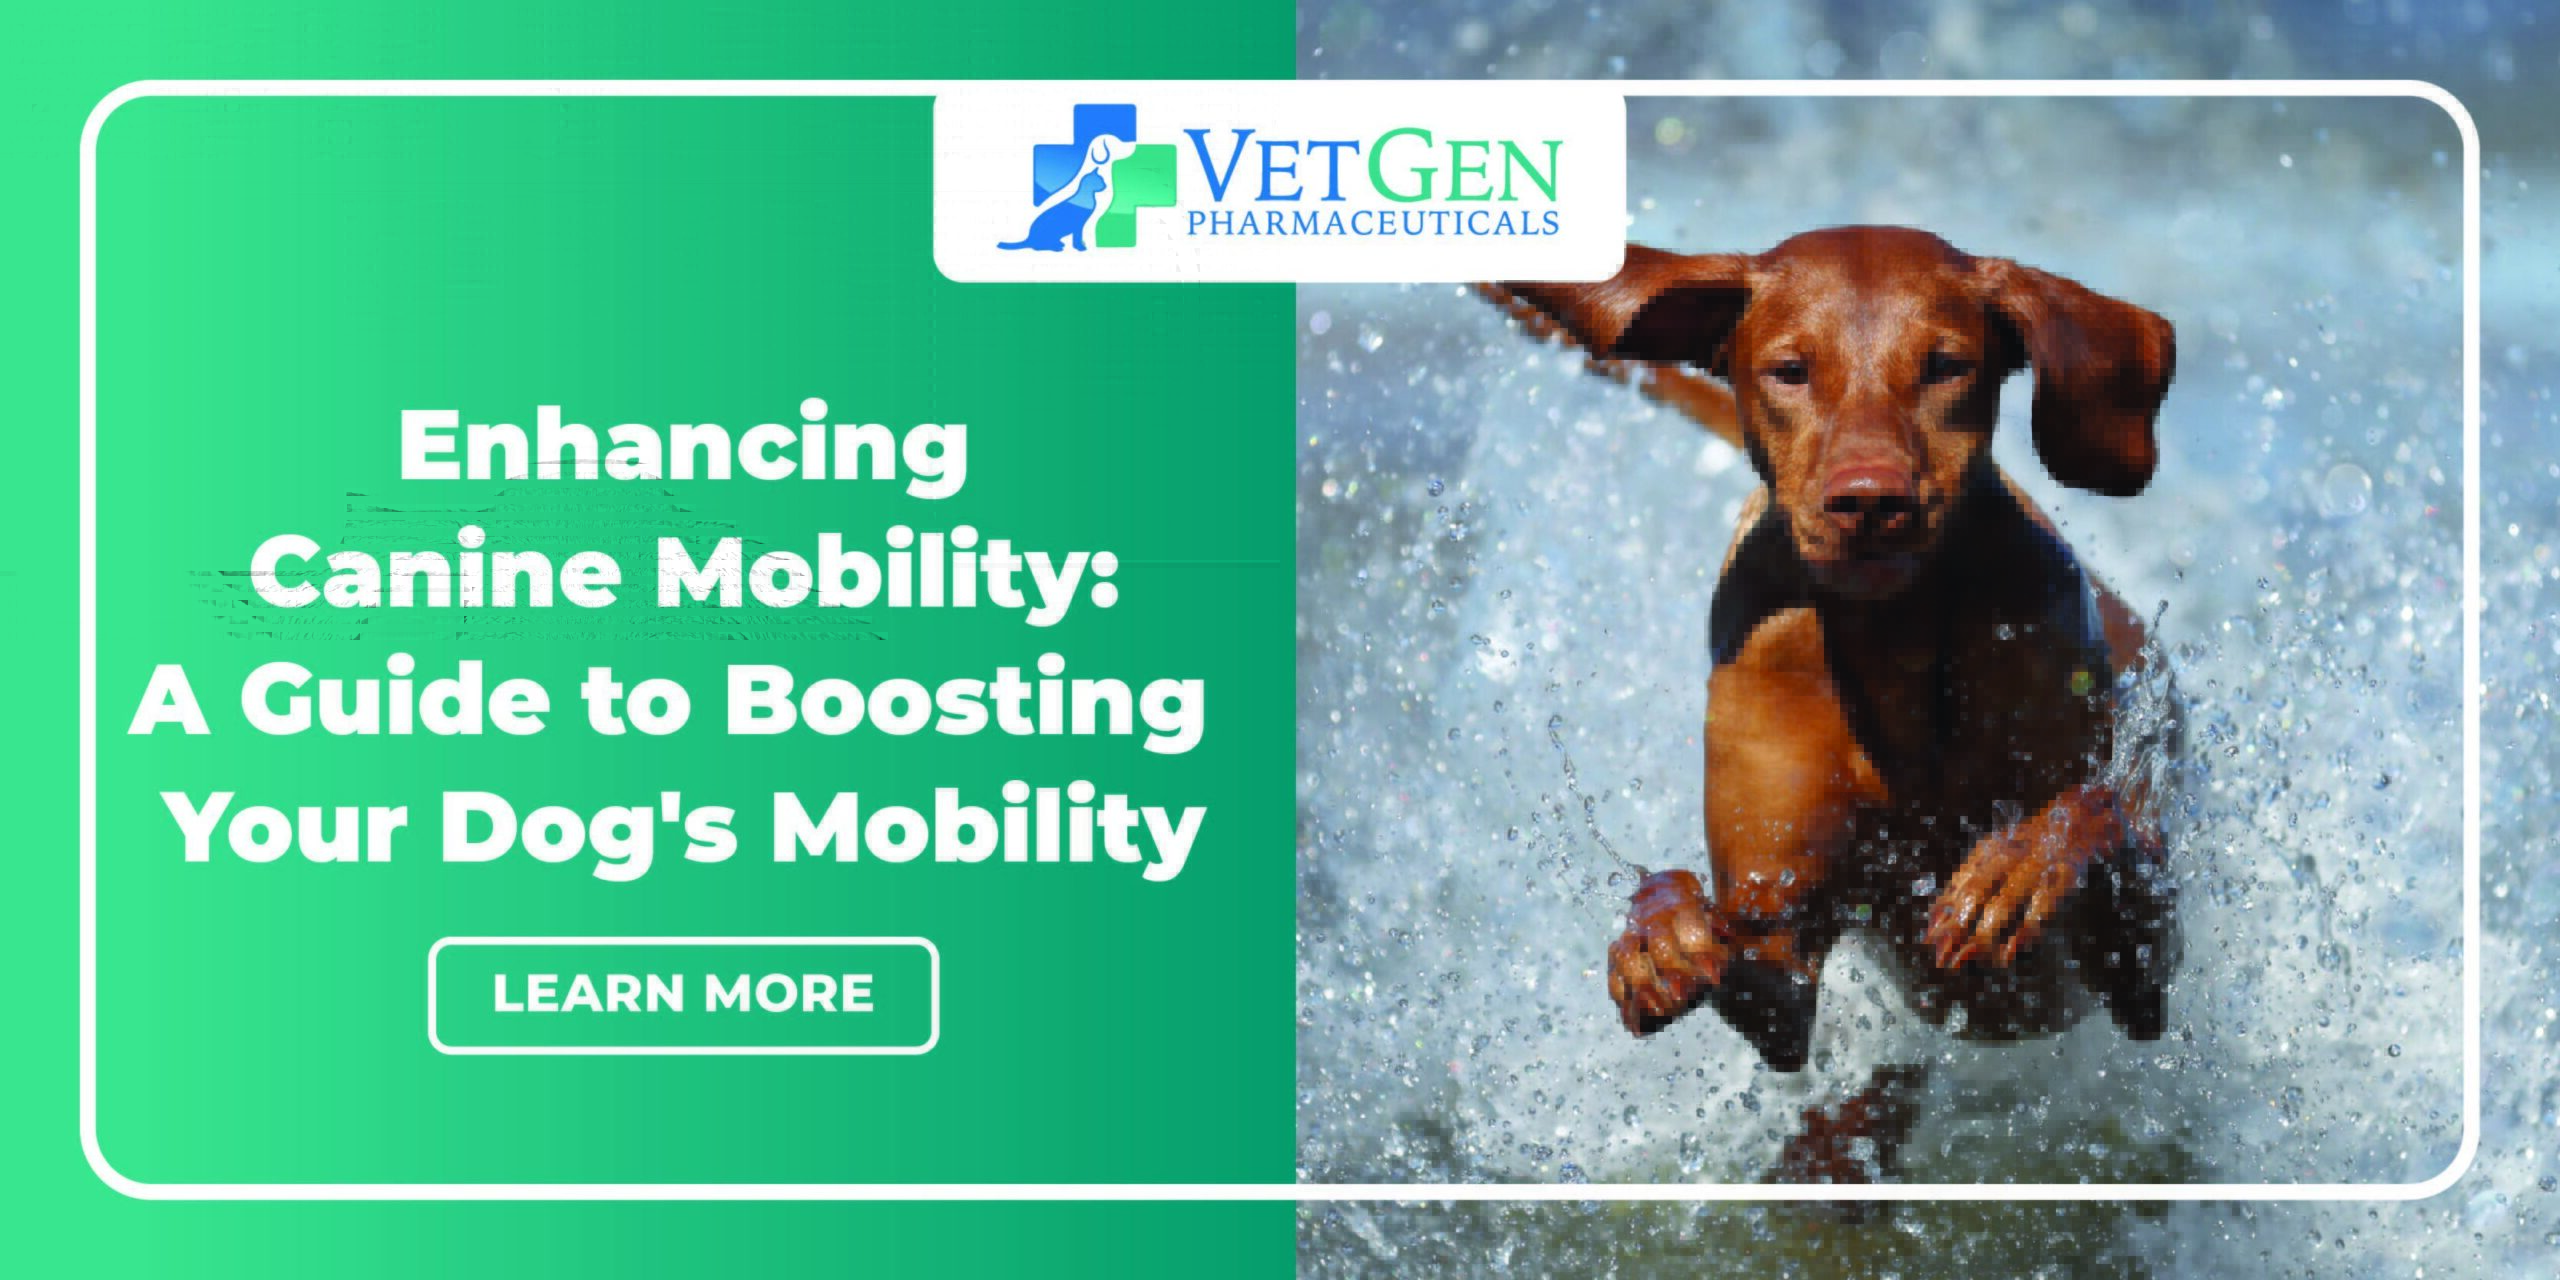 Enhancing Canine Mobility A Guide to Boosting Your Dog's Mobility